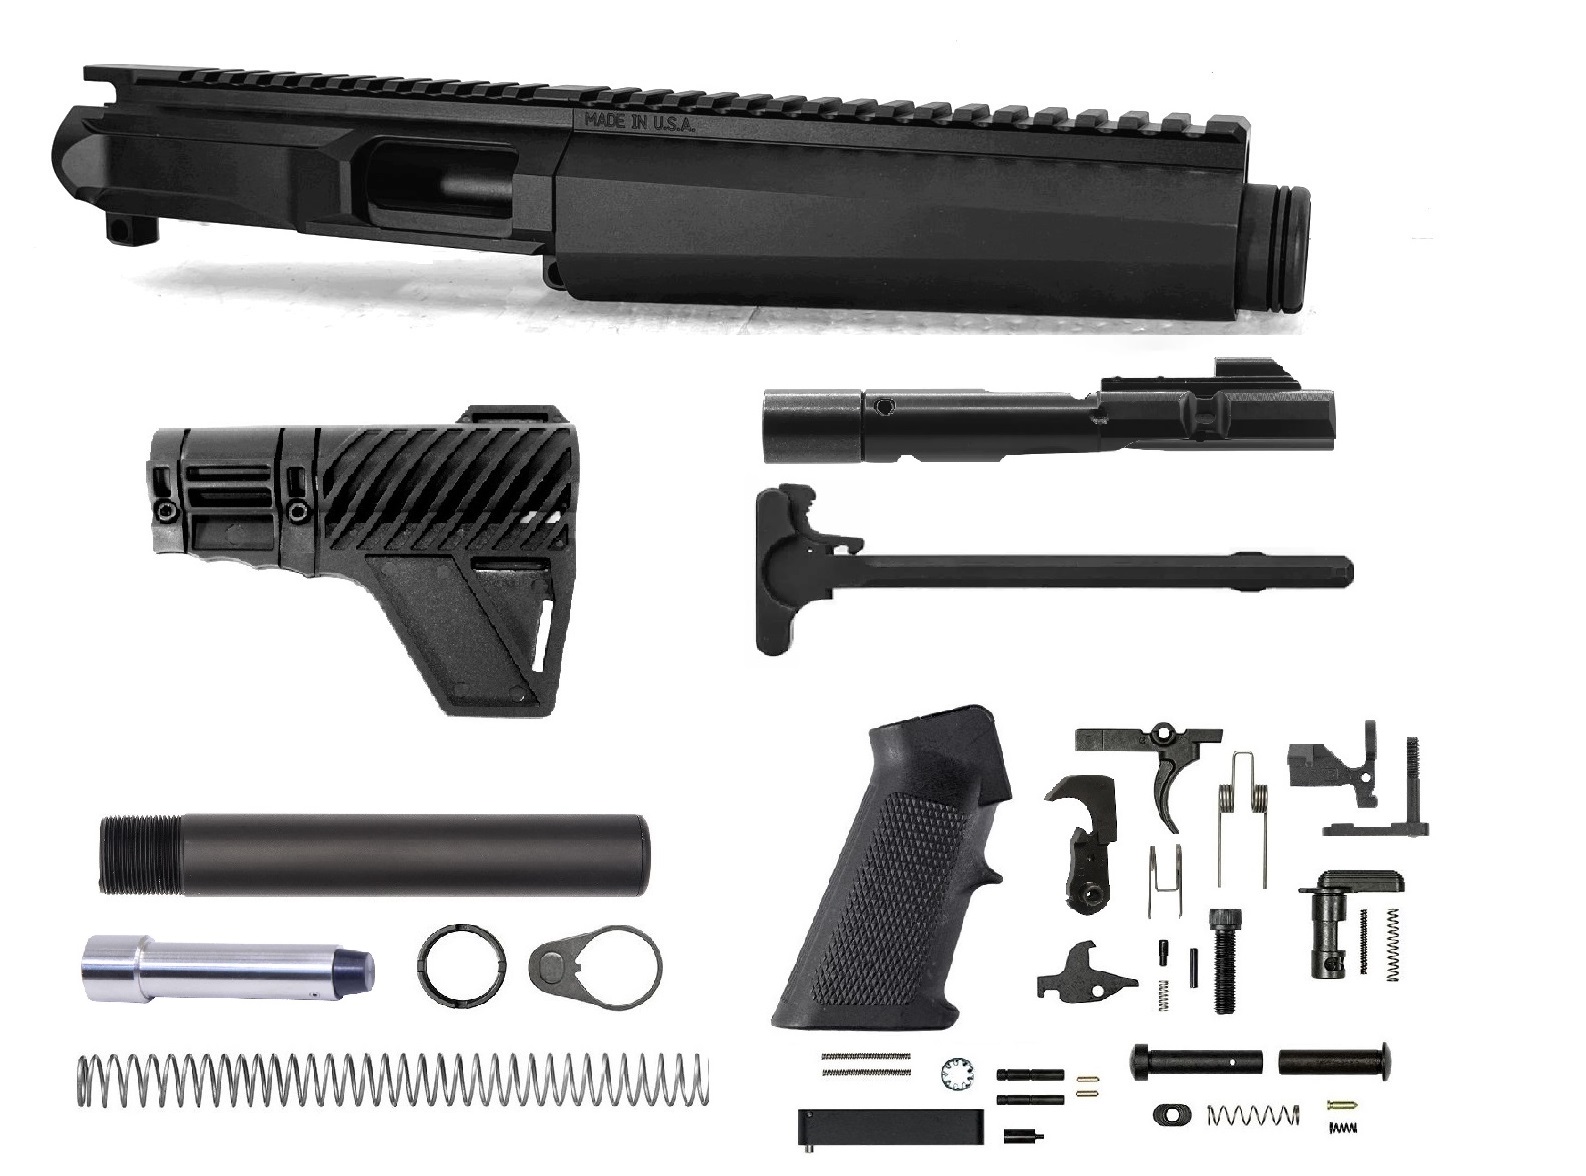 5 inch AR-15 AR-V MP5 Style 45 ACP Pistol Caliber Melonite Upper w/Can Complete Kit